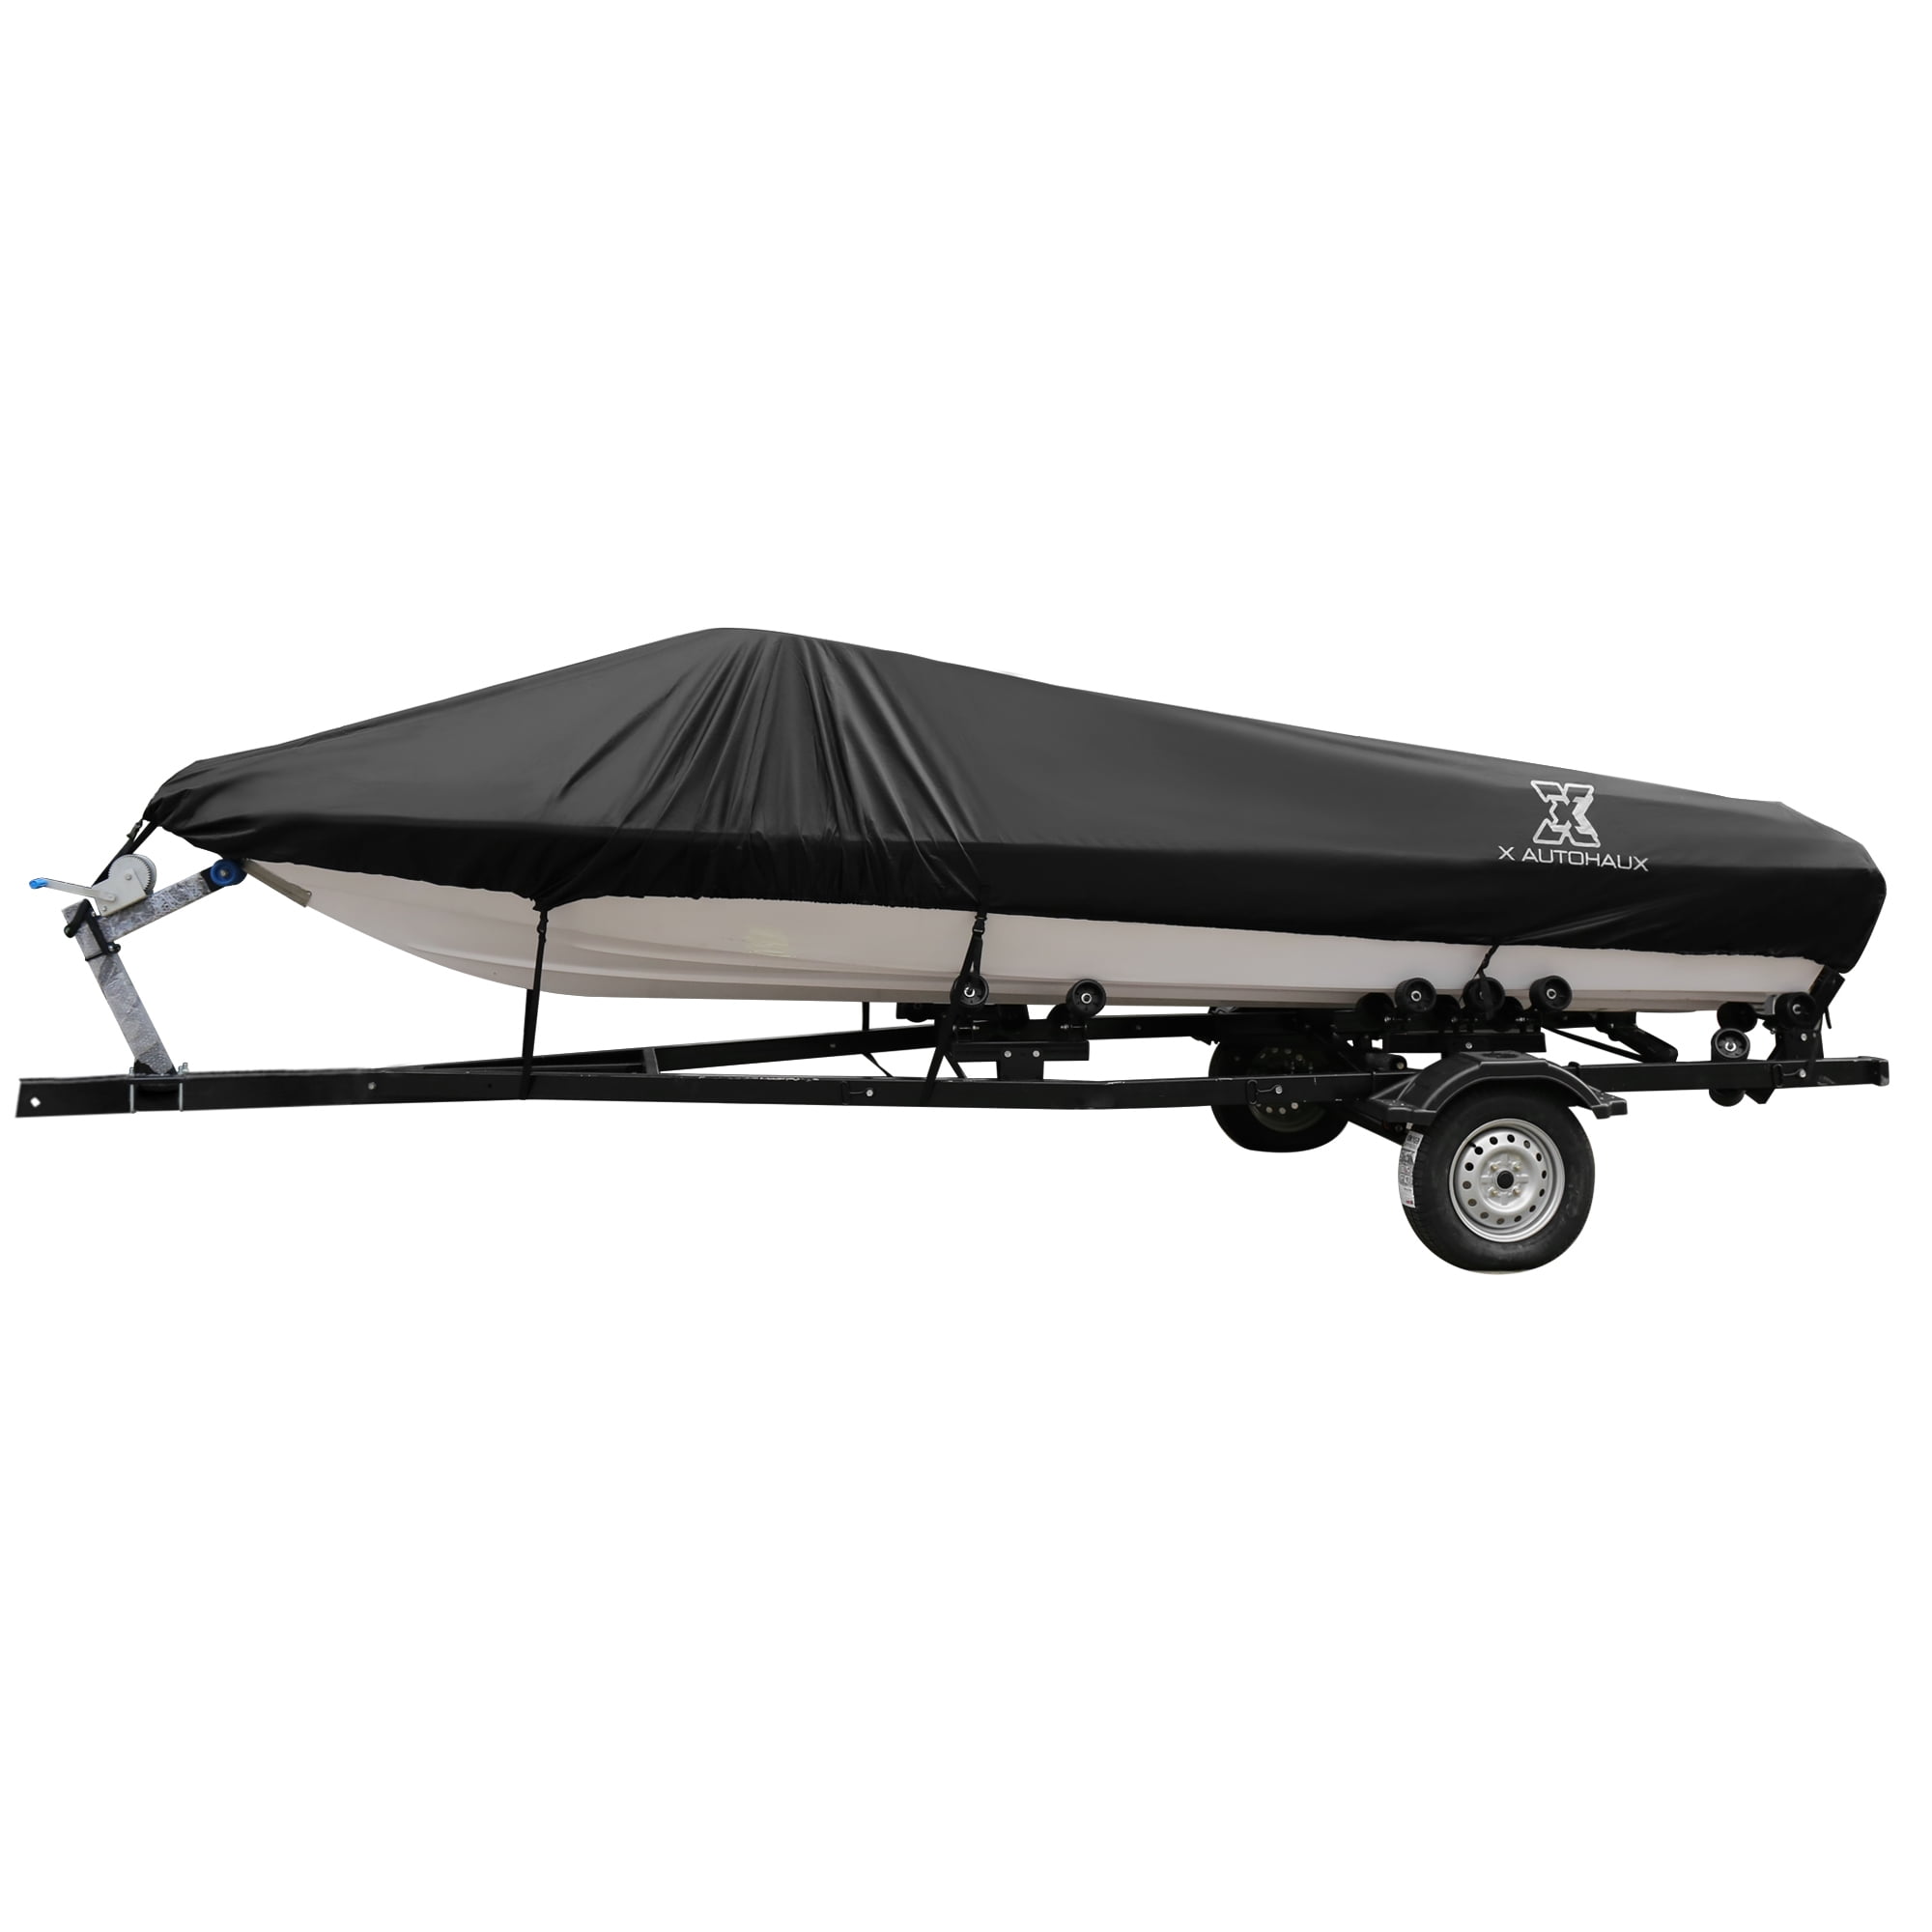 1618ft 94" 300D Polyester Boat Cover Waterproof Black VHull Protector 590 x 290cm Walmart